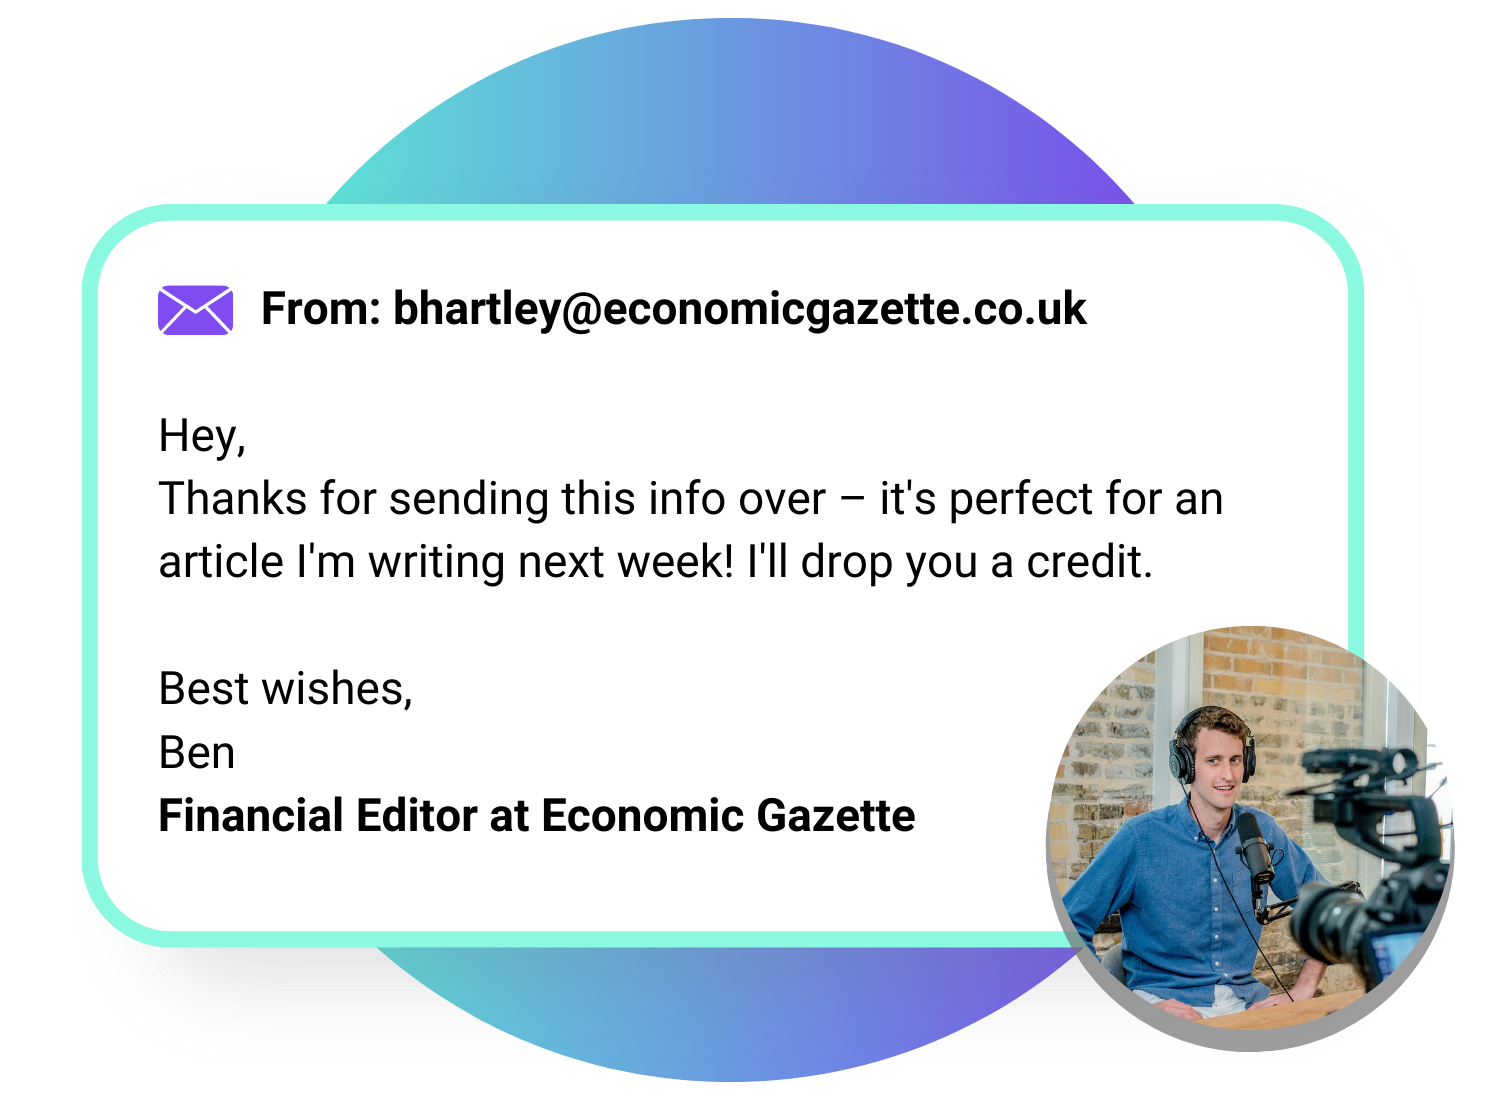 A colorful circle overlaid with an example email from a journalist which reads: "From: bhartley@economicgazette.com Hey, Thanks for sending this info over – it's perfect for an article I'm writing next week! I'll drop you a credit. Best wishes, Ben Financial Editor at Economic Gazette" with a photo of a male journalist sat in a recording studio.